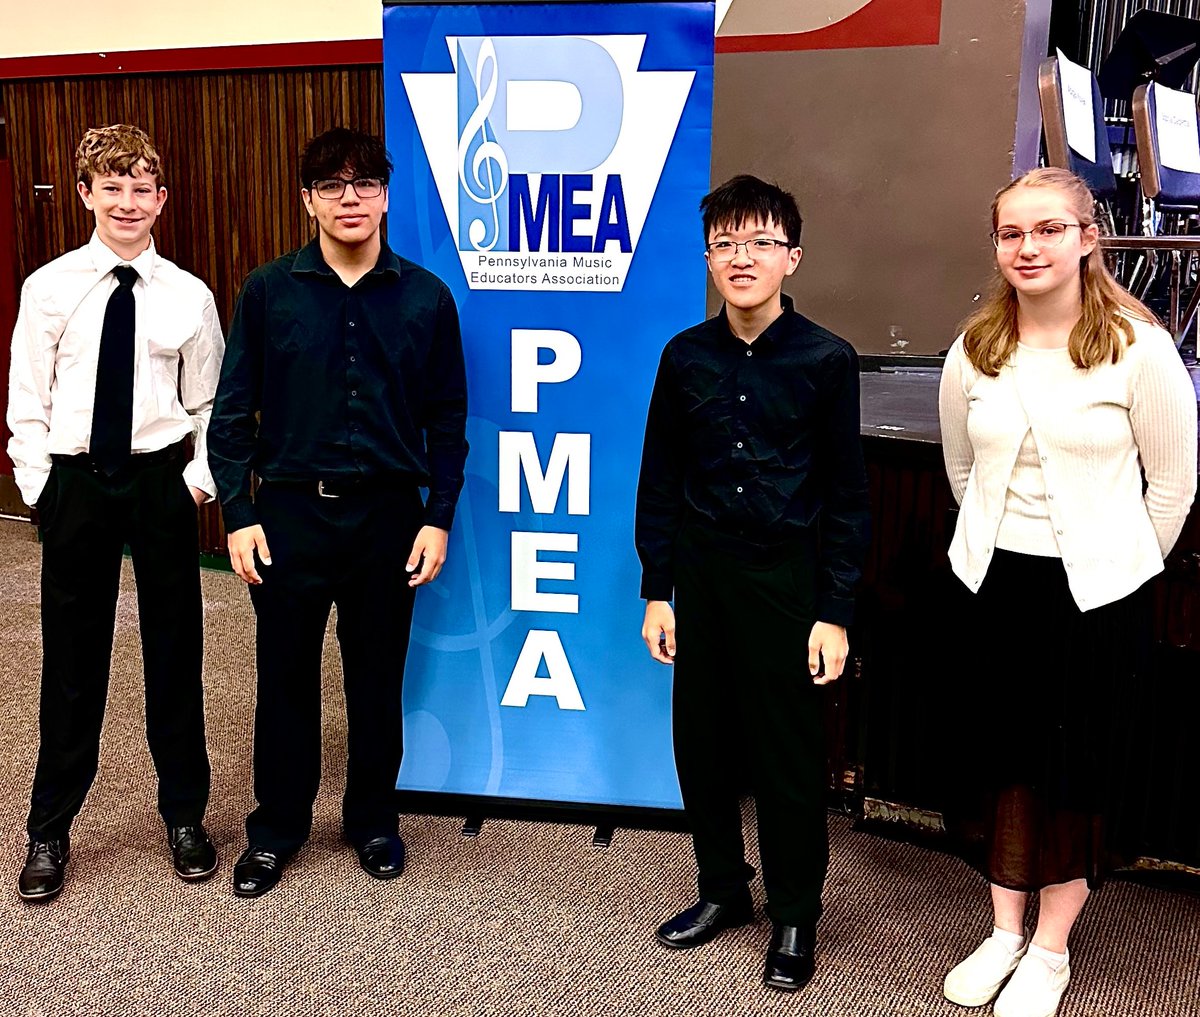 Congrats to the Pleasant Hills Middle School and #TJ students who participated in the @PMEAstate Junior High District Orchestra Festival! From left: Alex Lauver, Miguel Renda, Felix Zheng and Gabriella Deleel. Great job, #Jaguars! #WJHSD #WErTJ @phmsjaguars